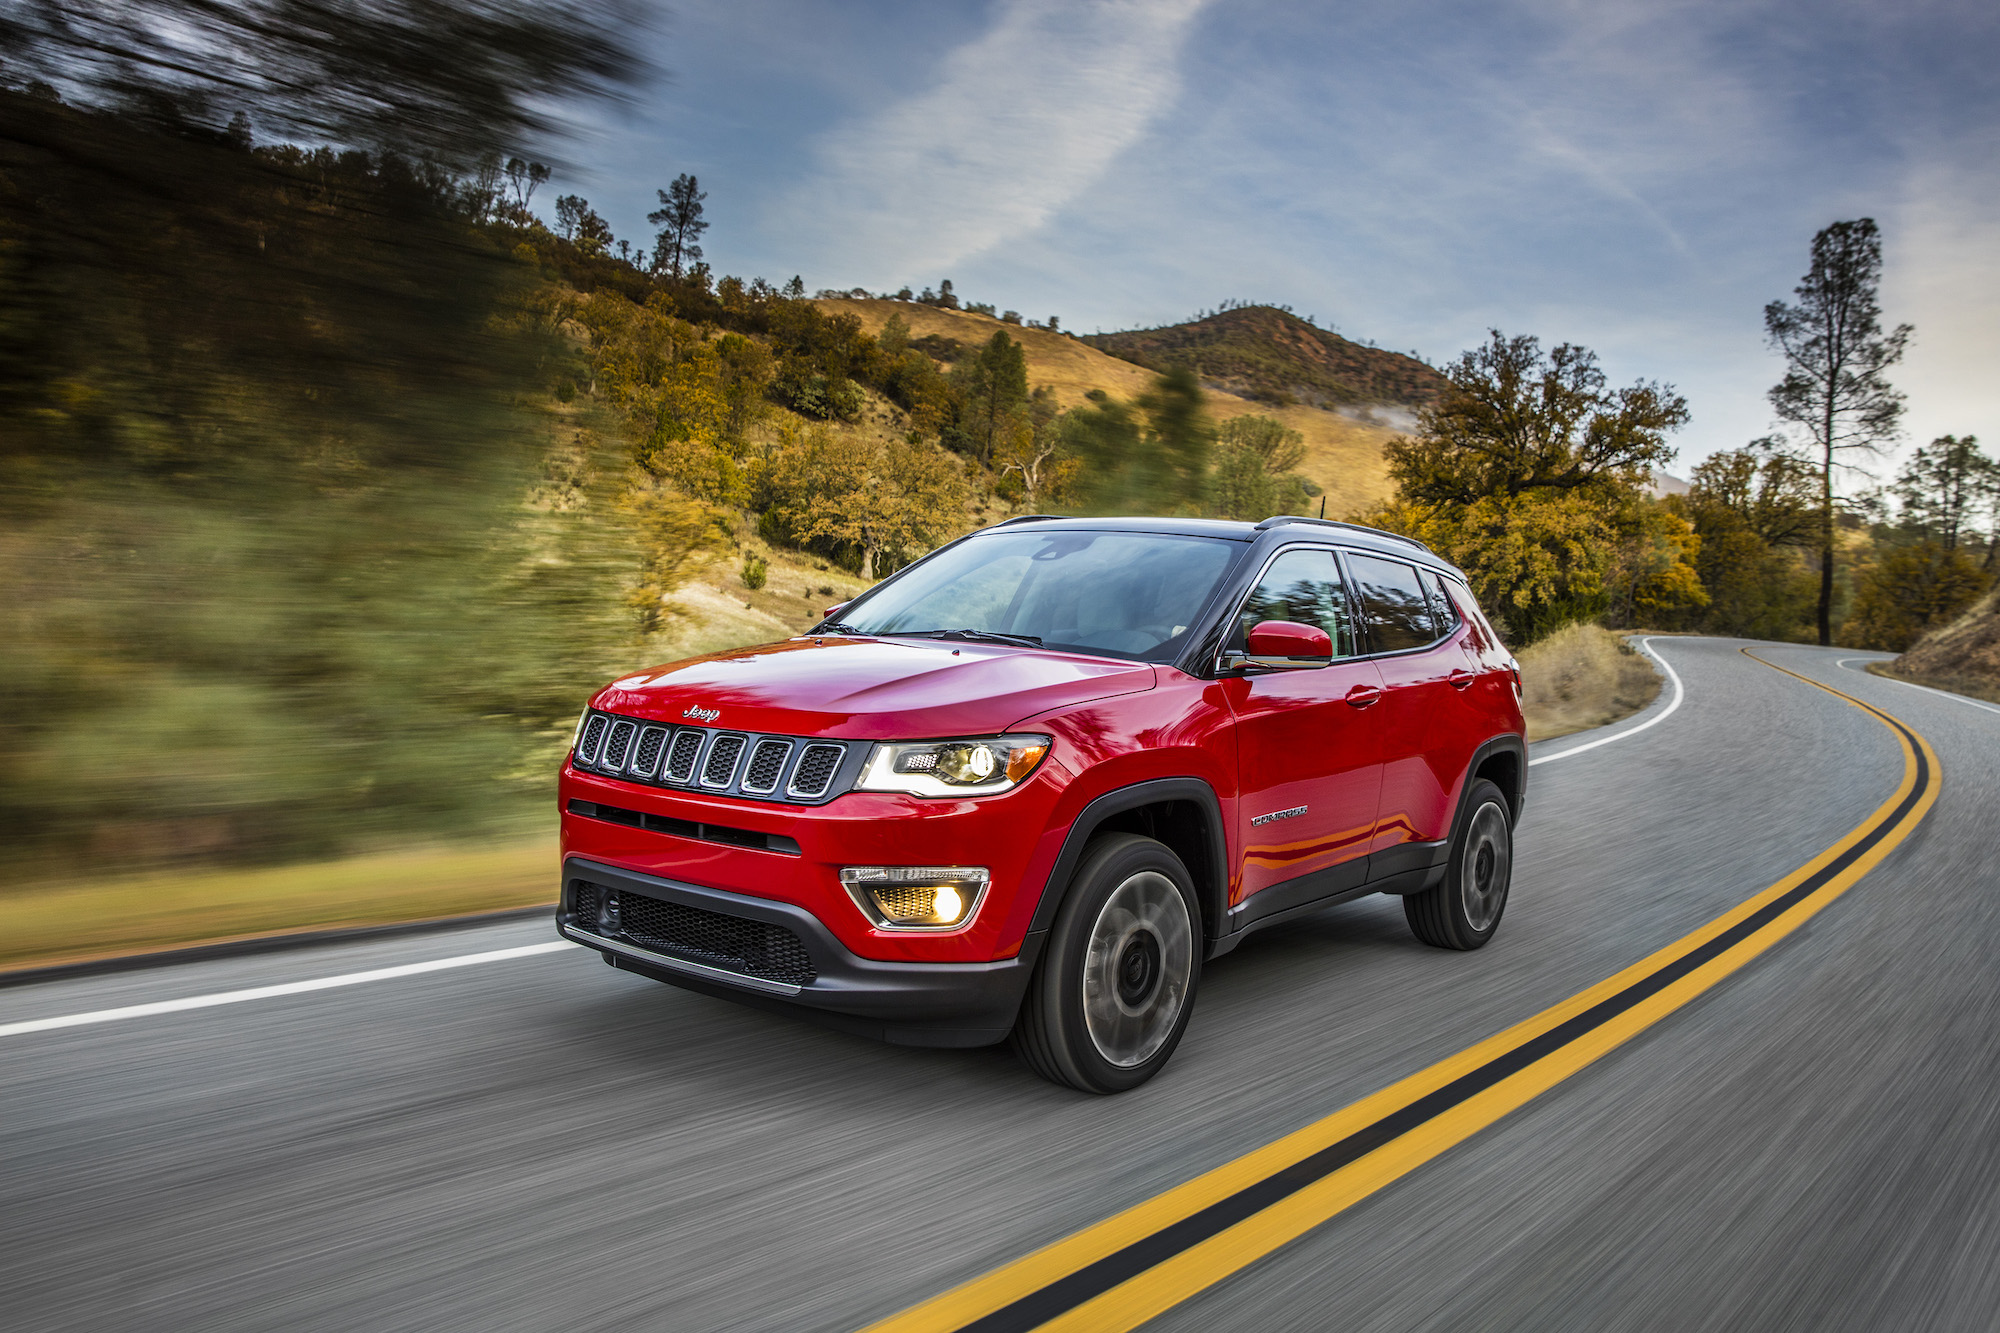 A red 2021 Jeep Compass Limited compact crossover SUV traveling on a two-lane highway through hills and trees